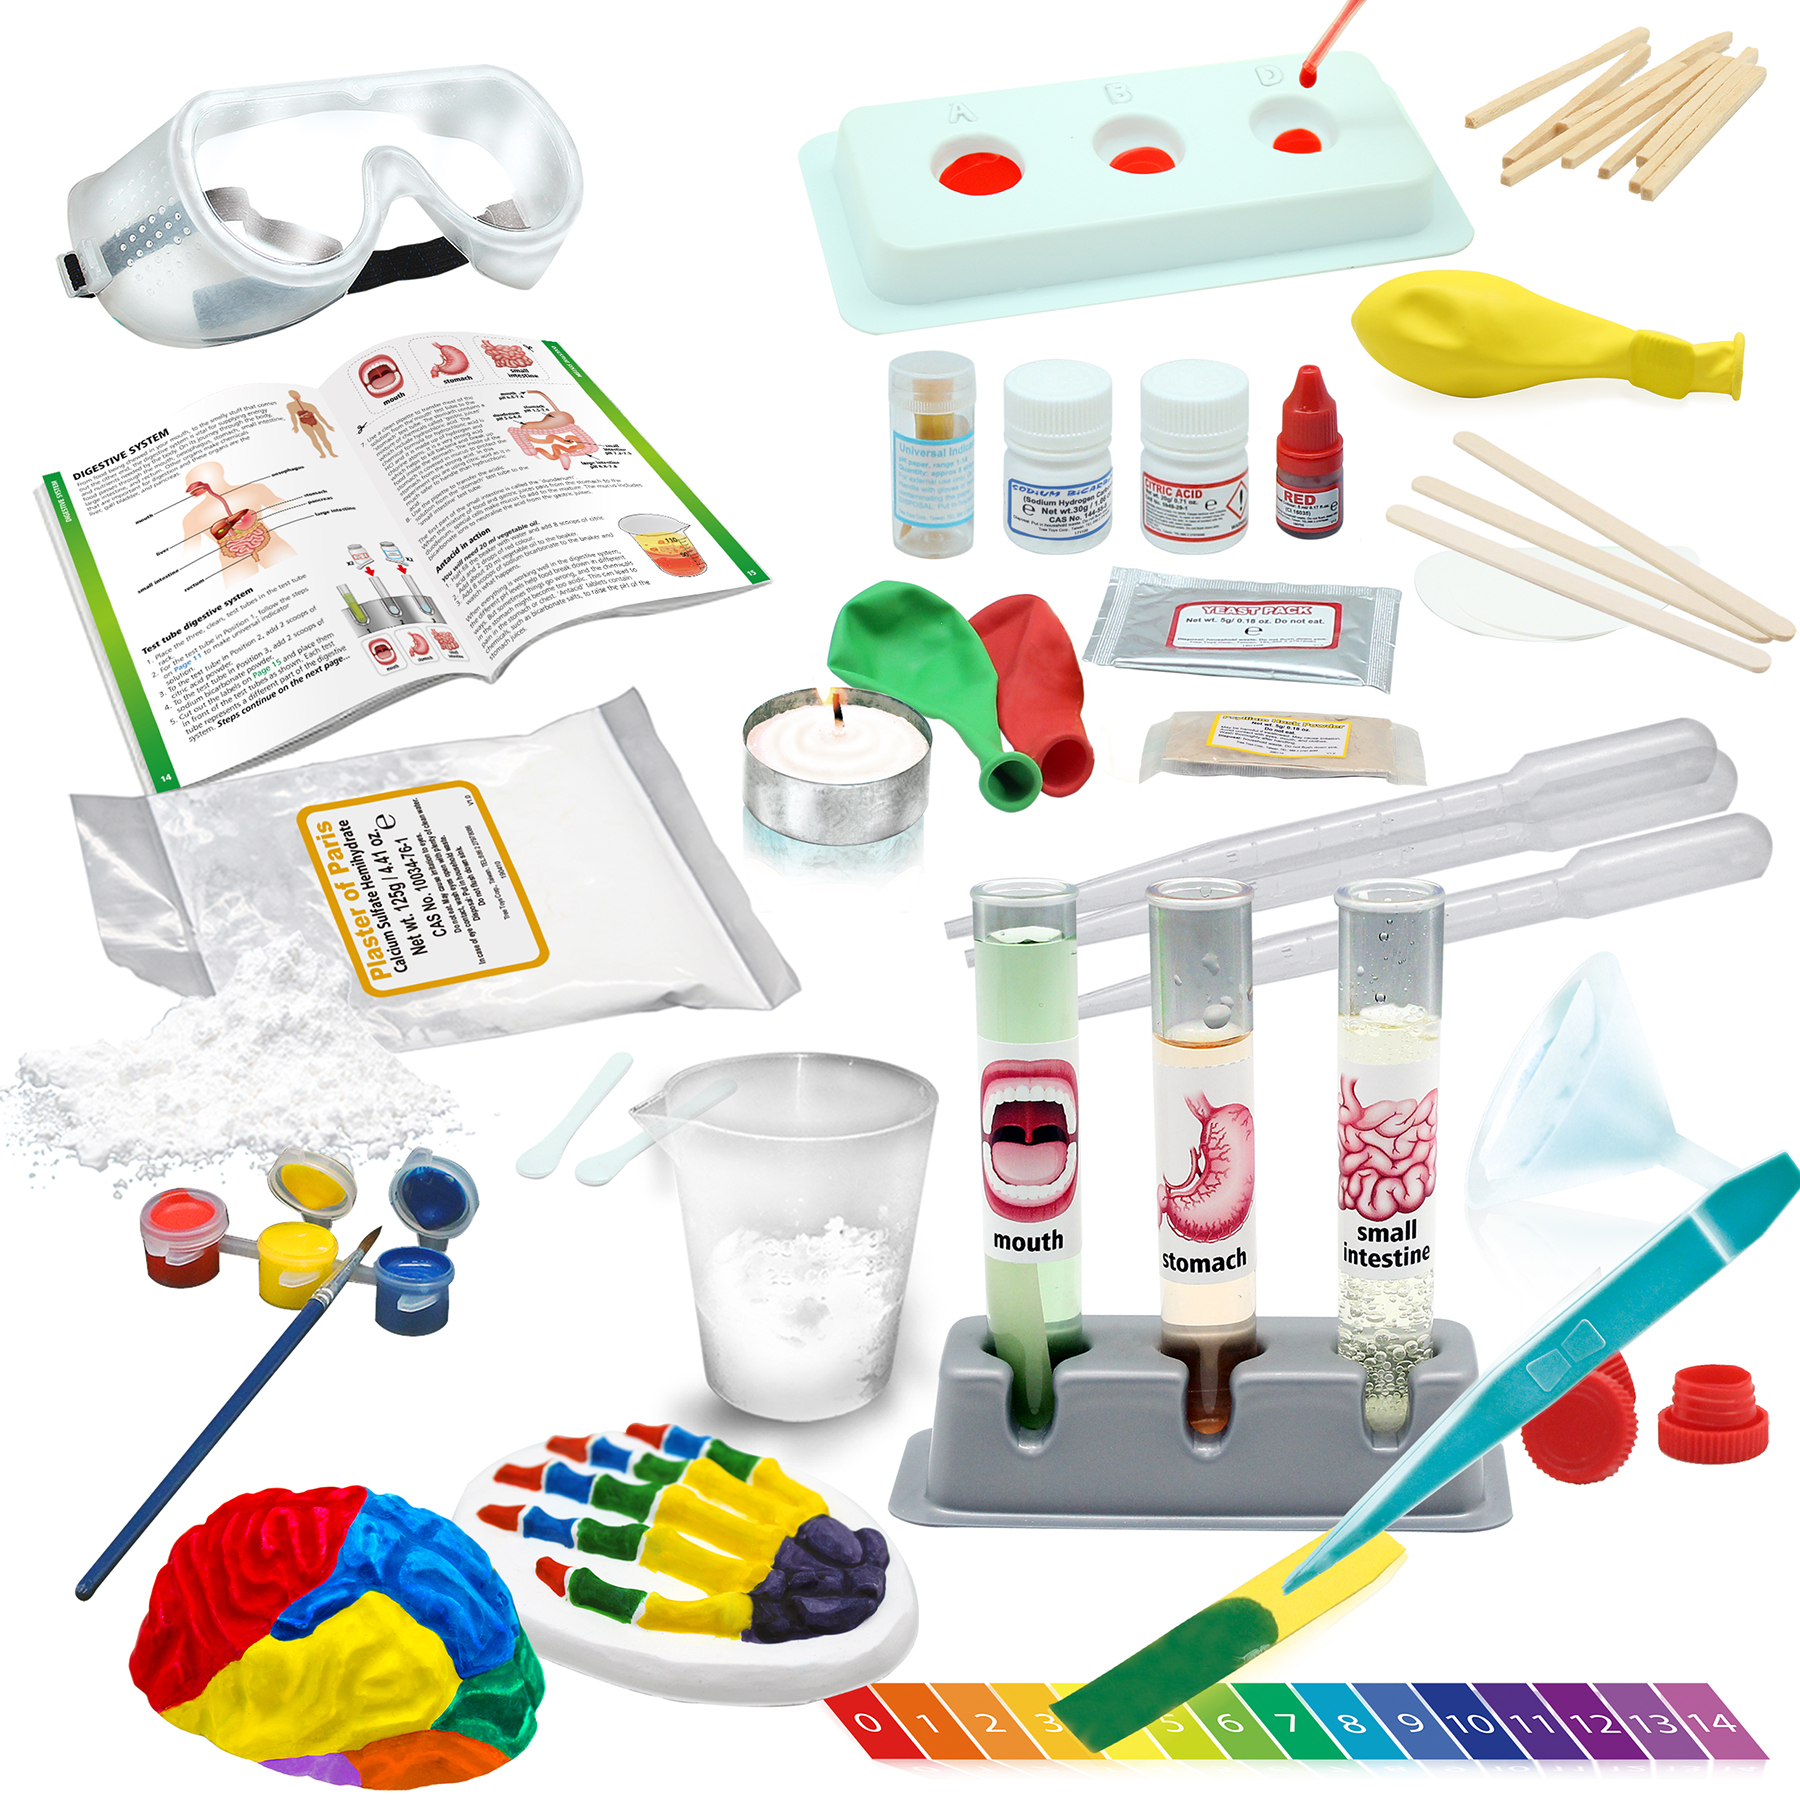 WILD ENVIRONMENTAL SCIENCE Medical Science - STEM Kit for Ages 8+ - Make a Test-Tube Digestive System, Extract DNA, Create Anatomical Models and More! image number null